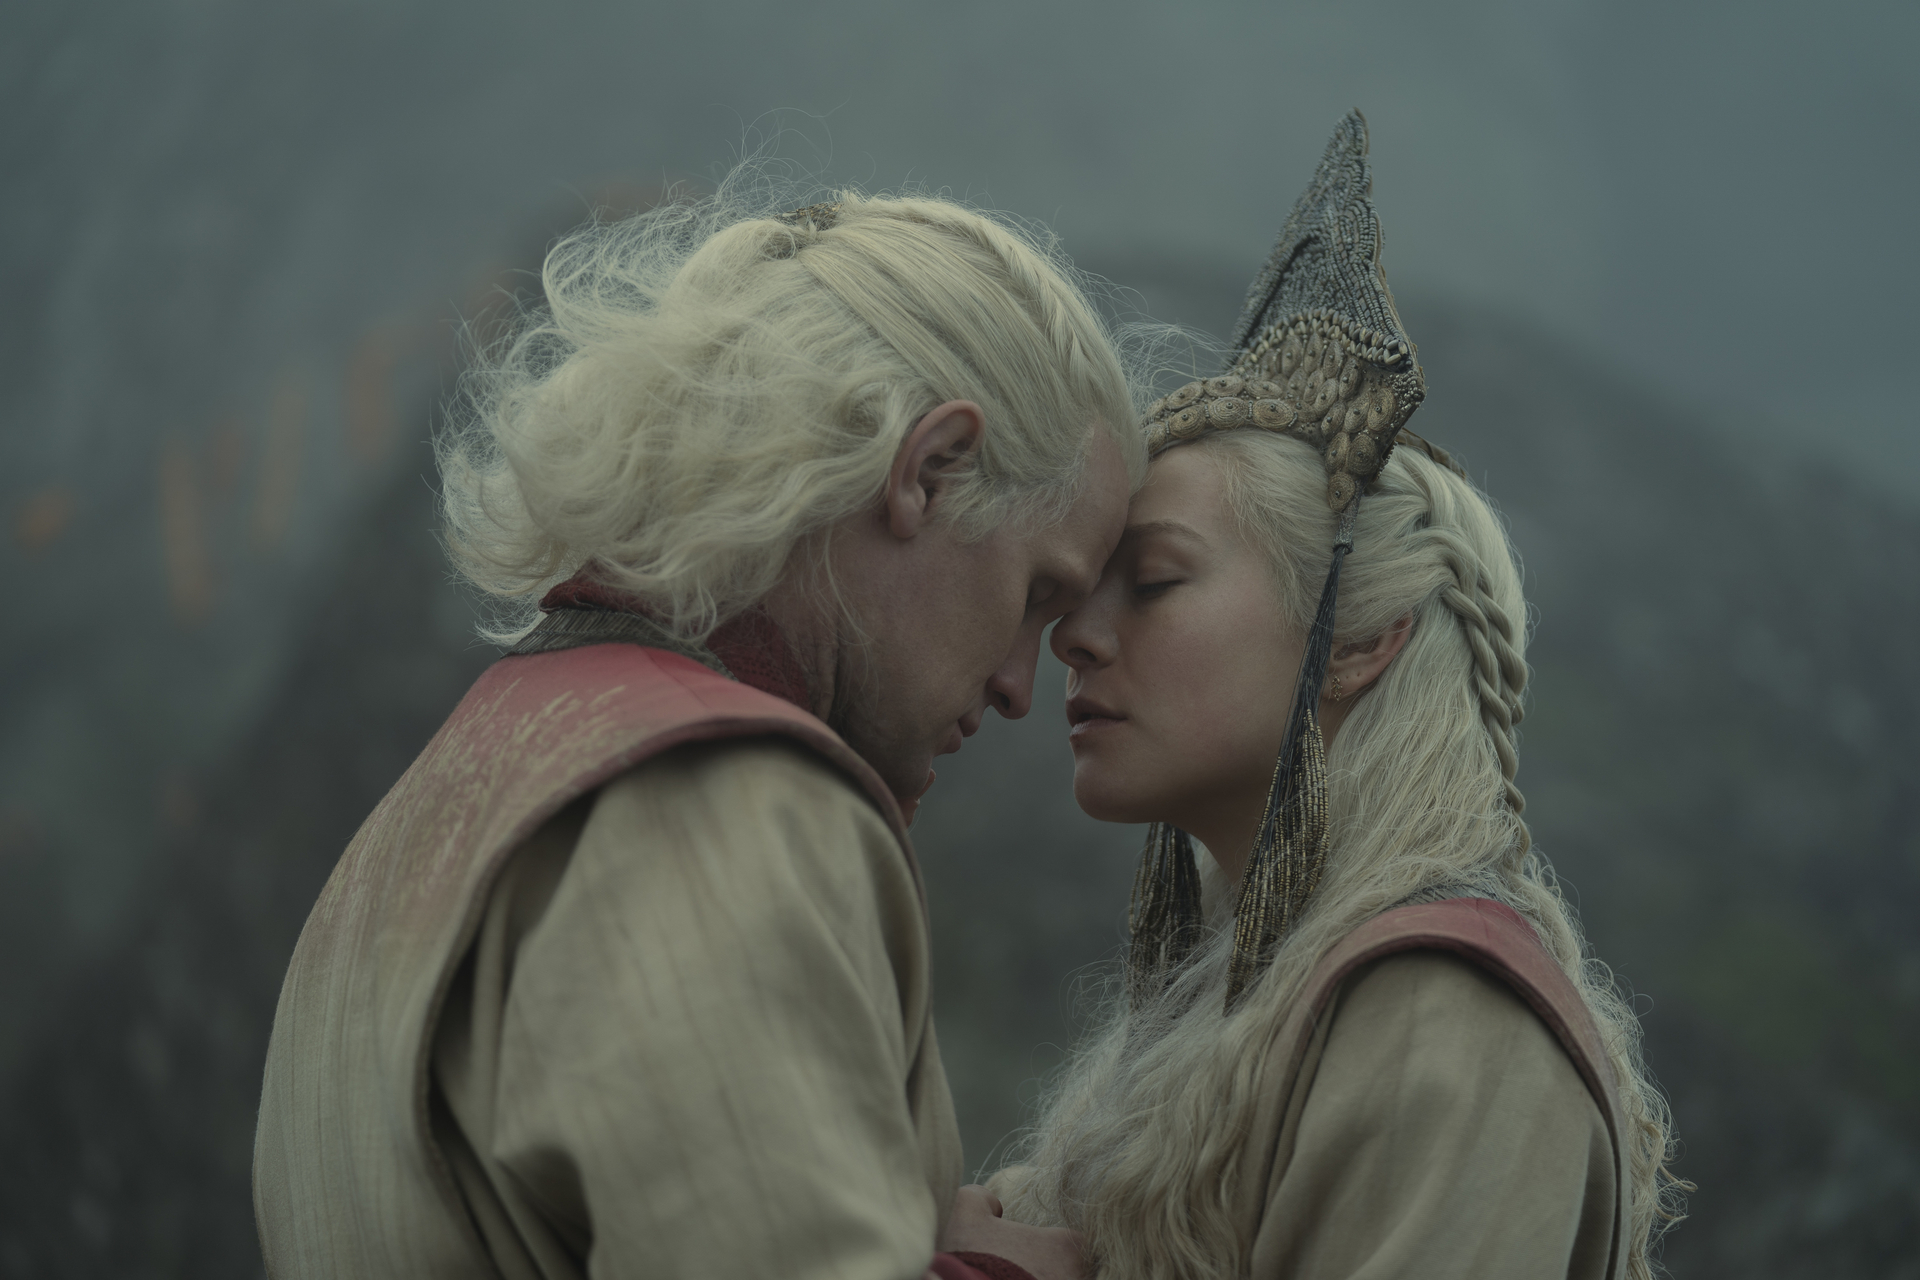 Matt Smith and Emma D'Arcy as Daemon and Rhaenyra Targaryen in <i>House of the Dragon</i> (Ollie Upton—HBO)